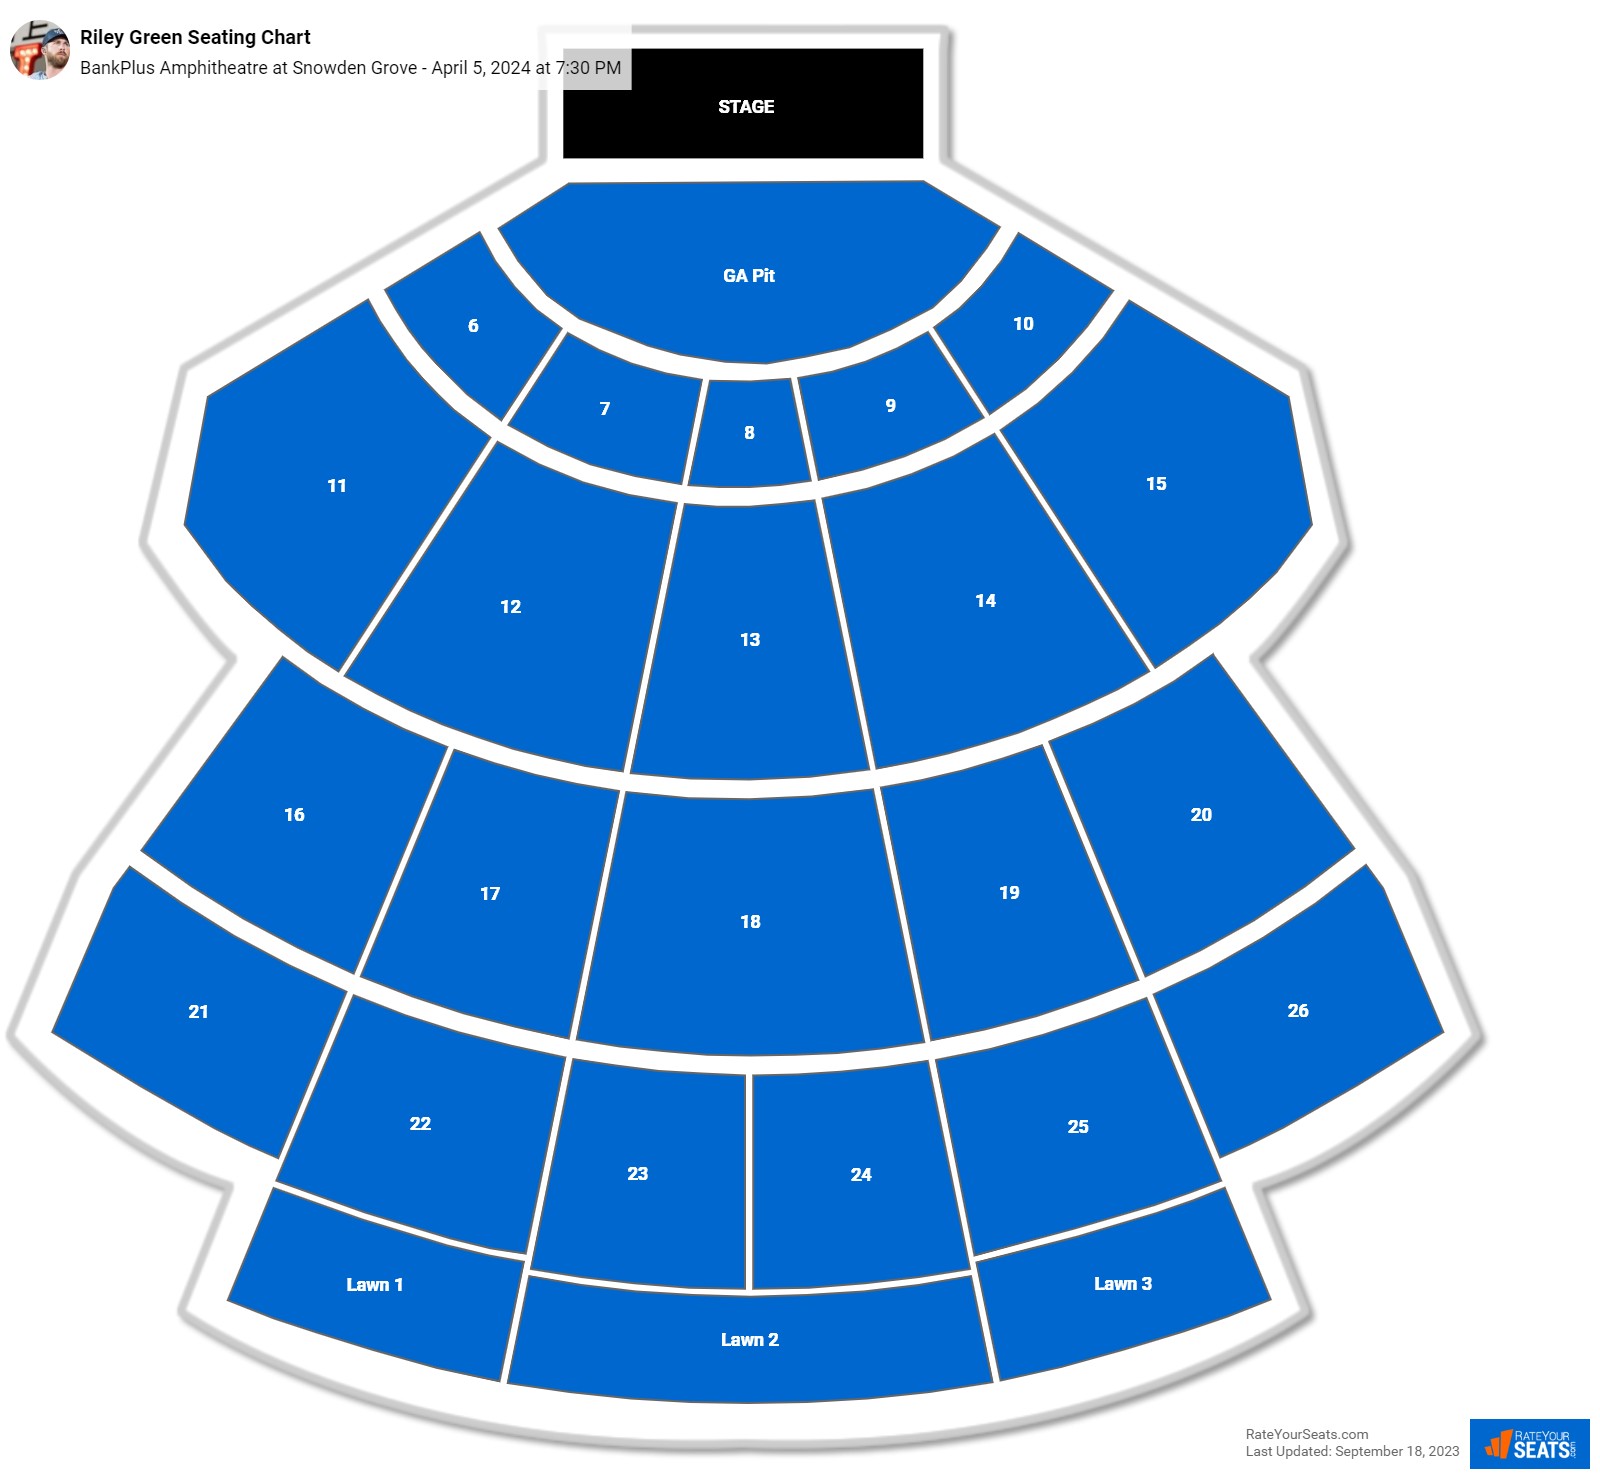 BankPlus Amphitheatre at Snowden Grove Seating Chart - RateYourSeats.com